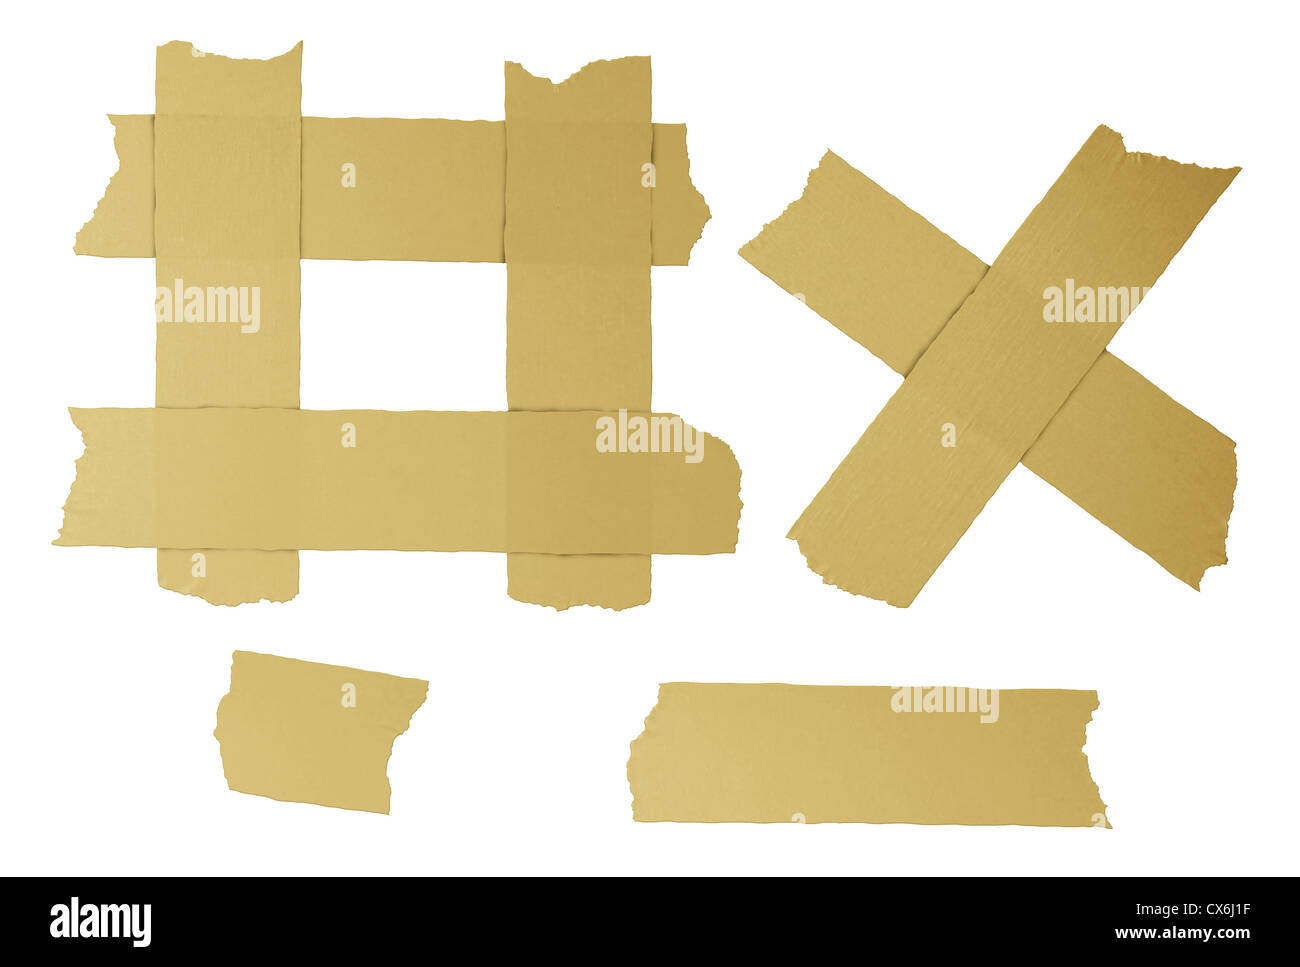 Masking tape torn strips of isolated elements of strong adhesive beige paper material asa office supplies used in packaging boxes or repairing or fixing broken things that need to be sealed air tight. Stock Photo